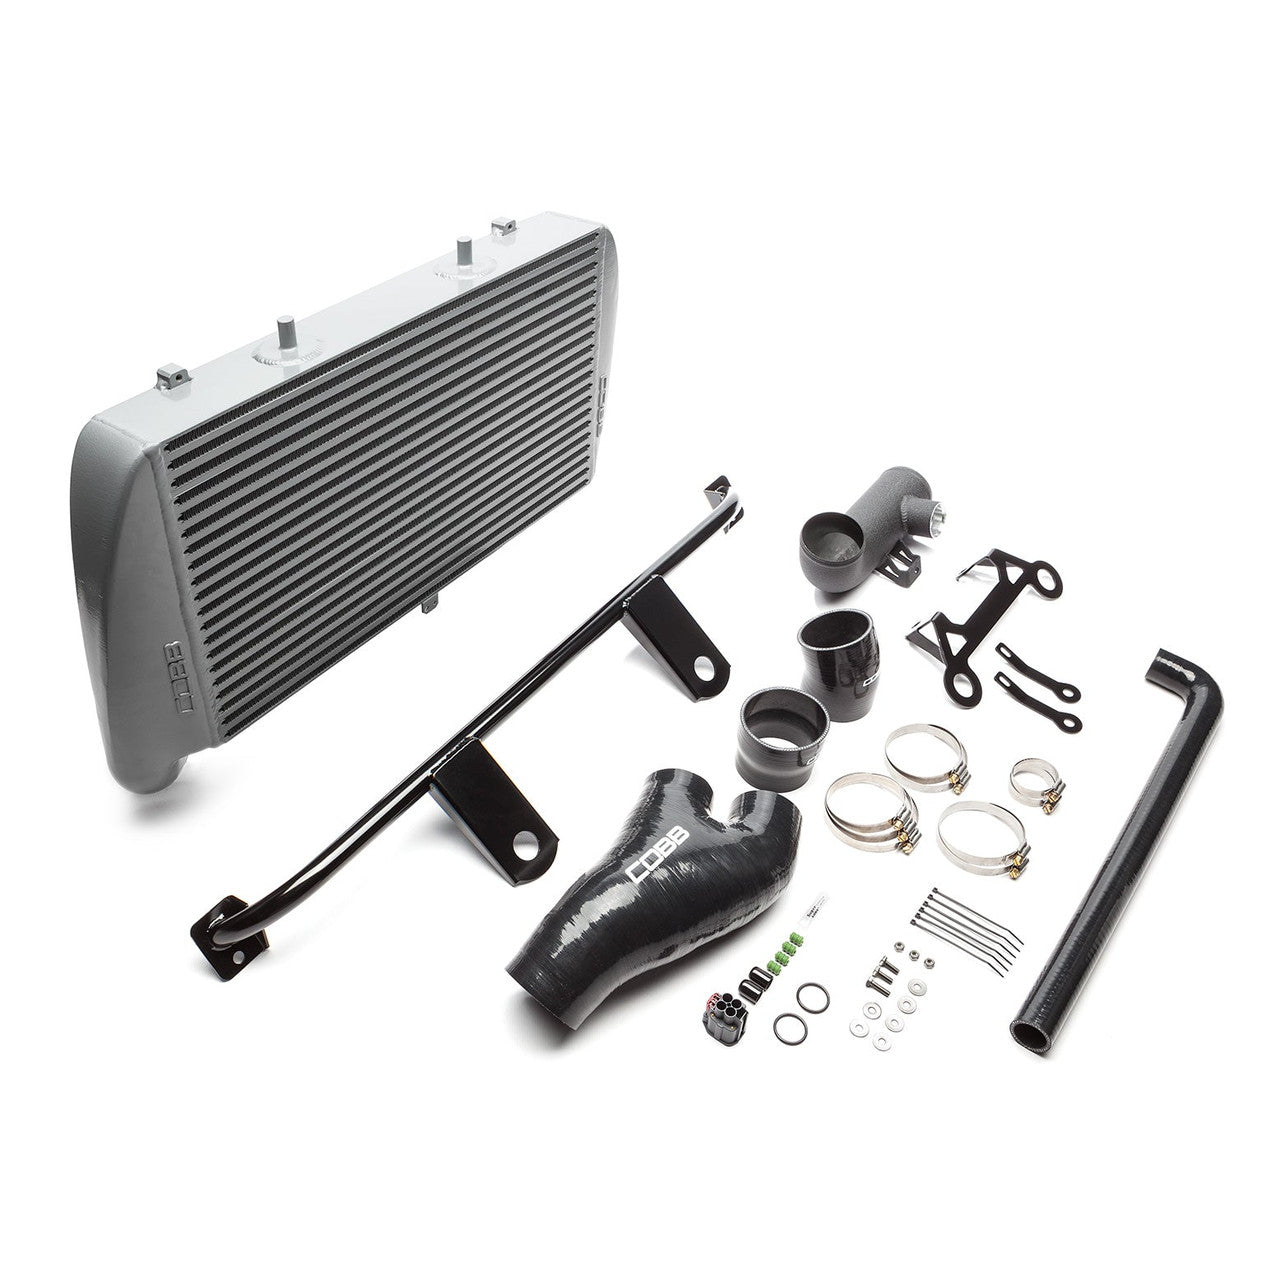 COBB Stage 2 Power Package F-150 EcoBoost 3.5L 2020